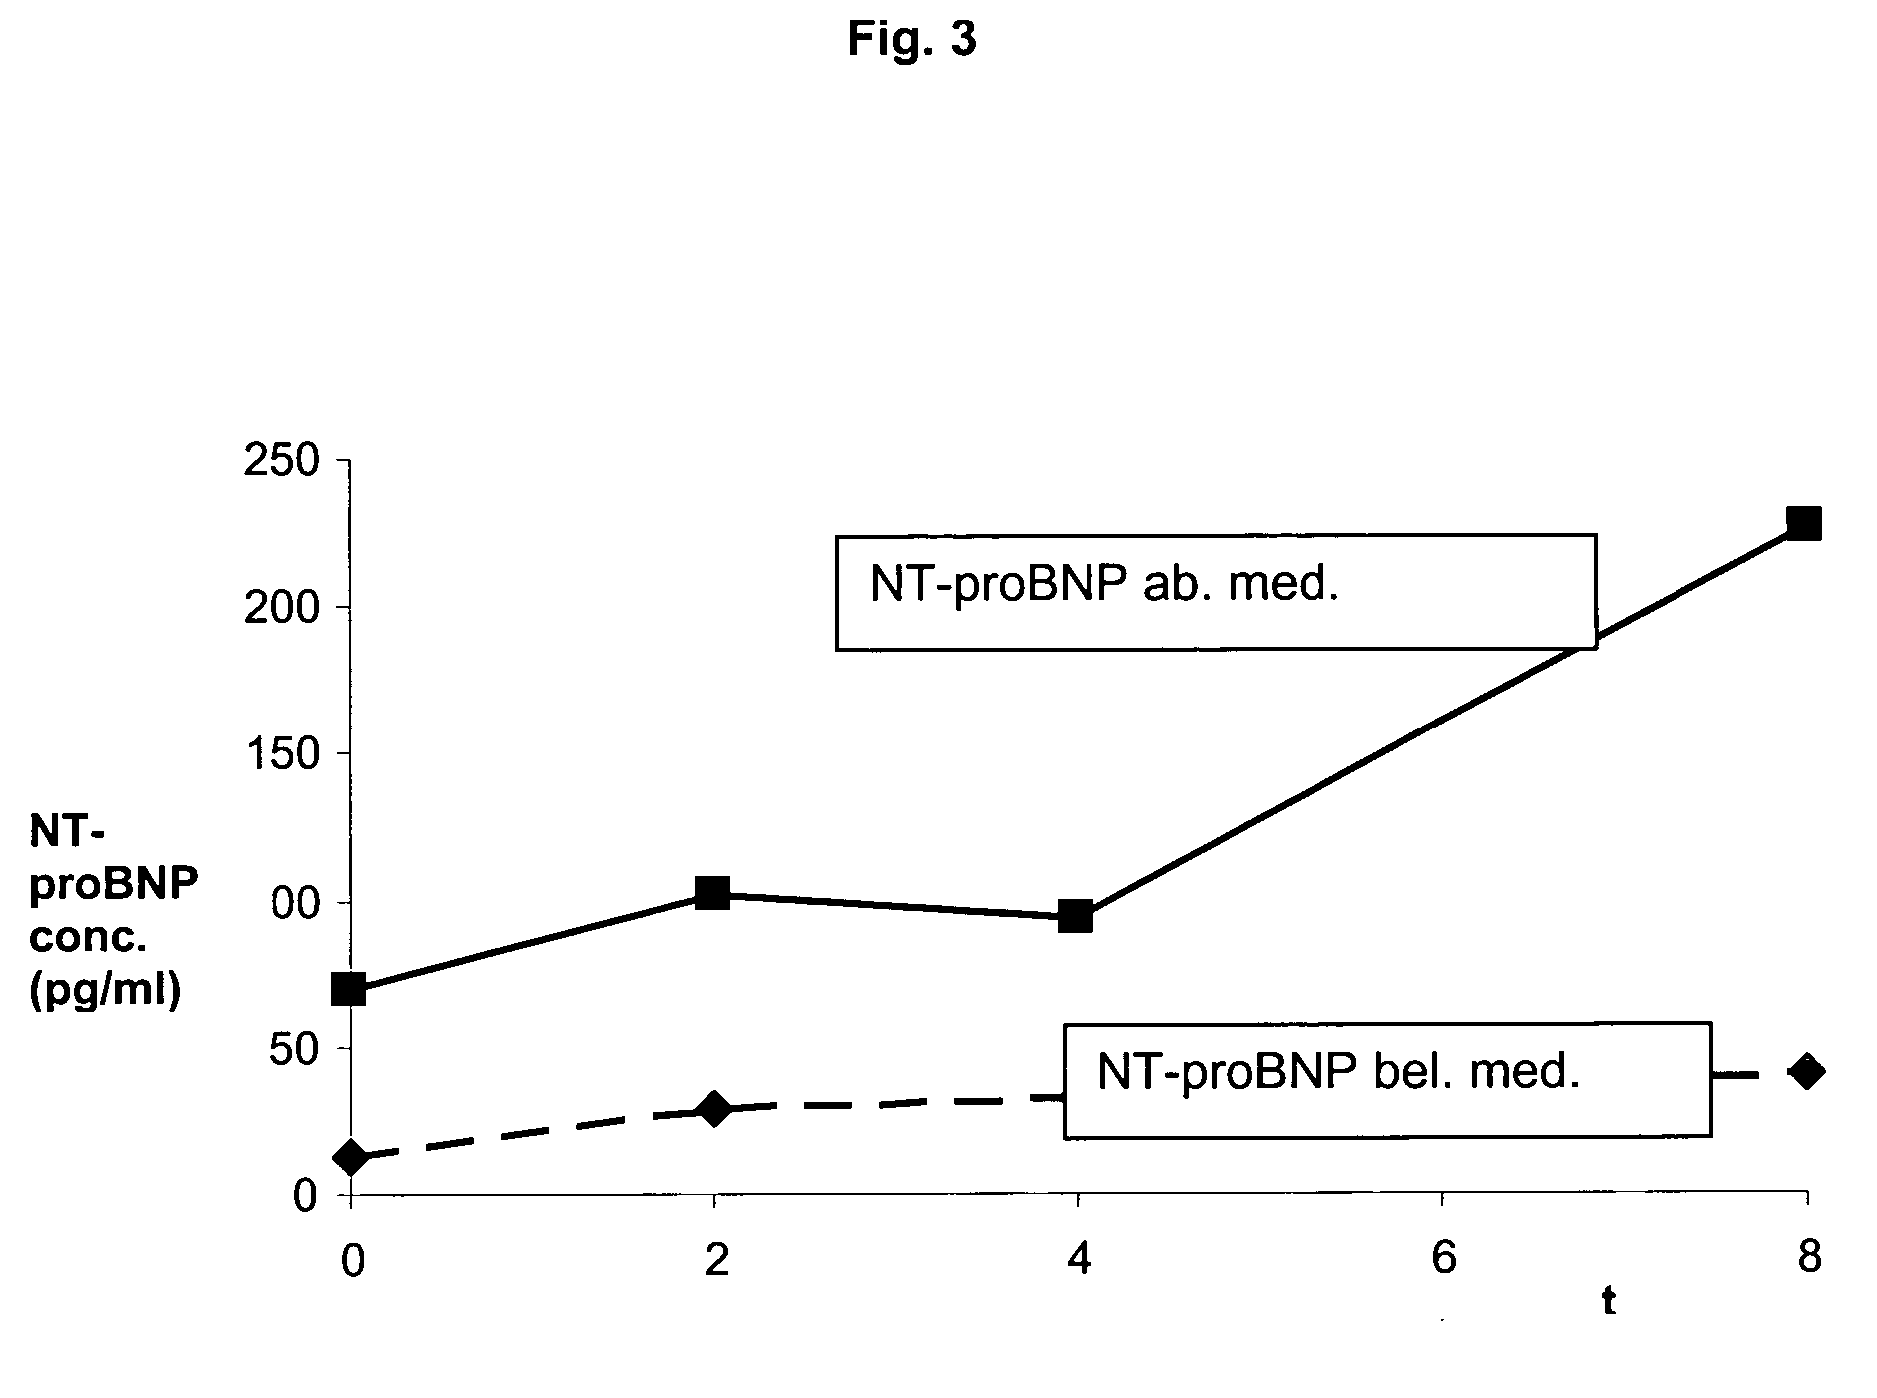 Multimarker panel for diabetes type 1 and 2